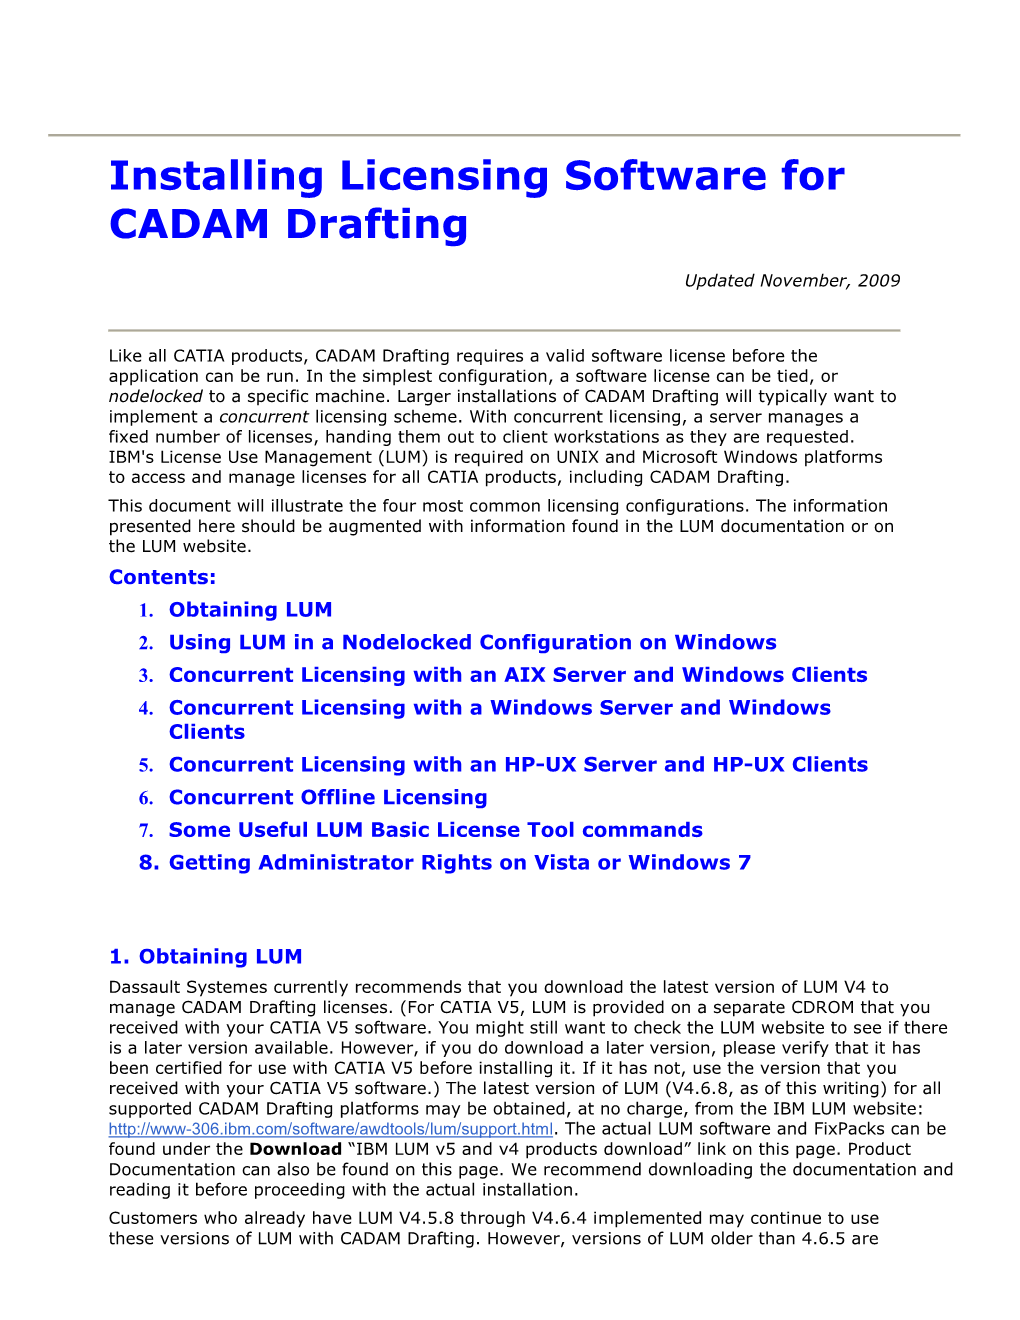 Installing Licensing Software for CADAM Drafting